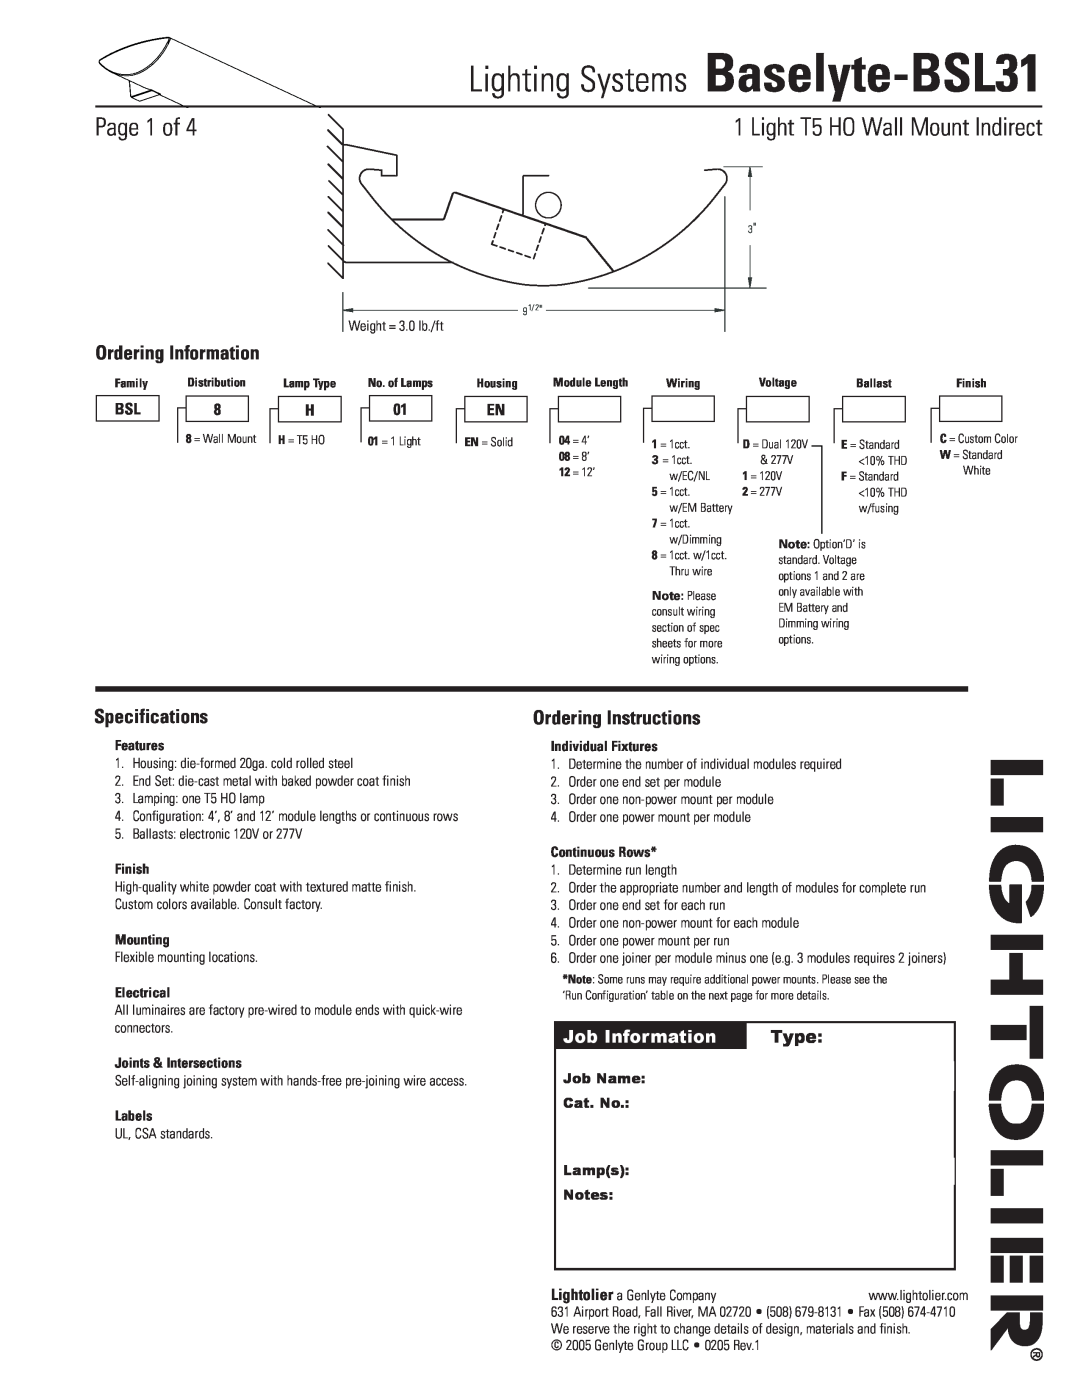 Lightolier specifications Lighting Systems Baselyte-BSL31, Page  of, Specifications, Ordering Instructions, Type 